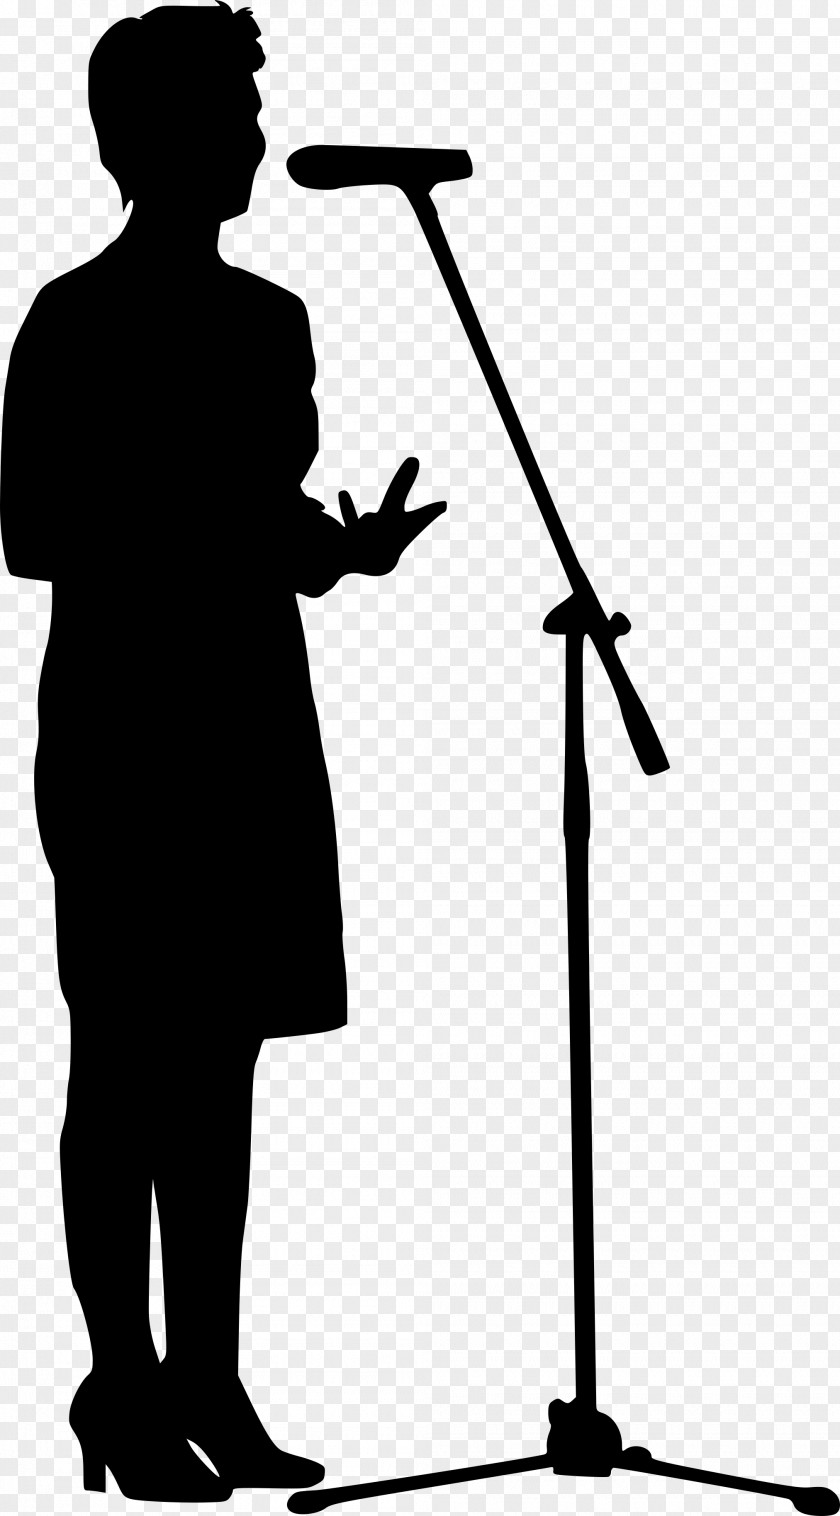 Criminal Justice Symbol Silhouette Musical Instrument Accessory Clip Art Microphone PNG